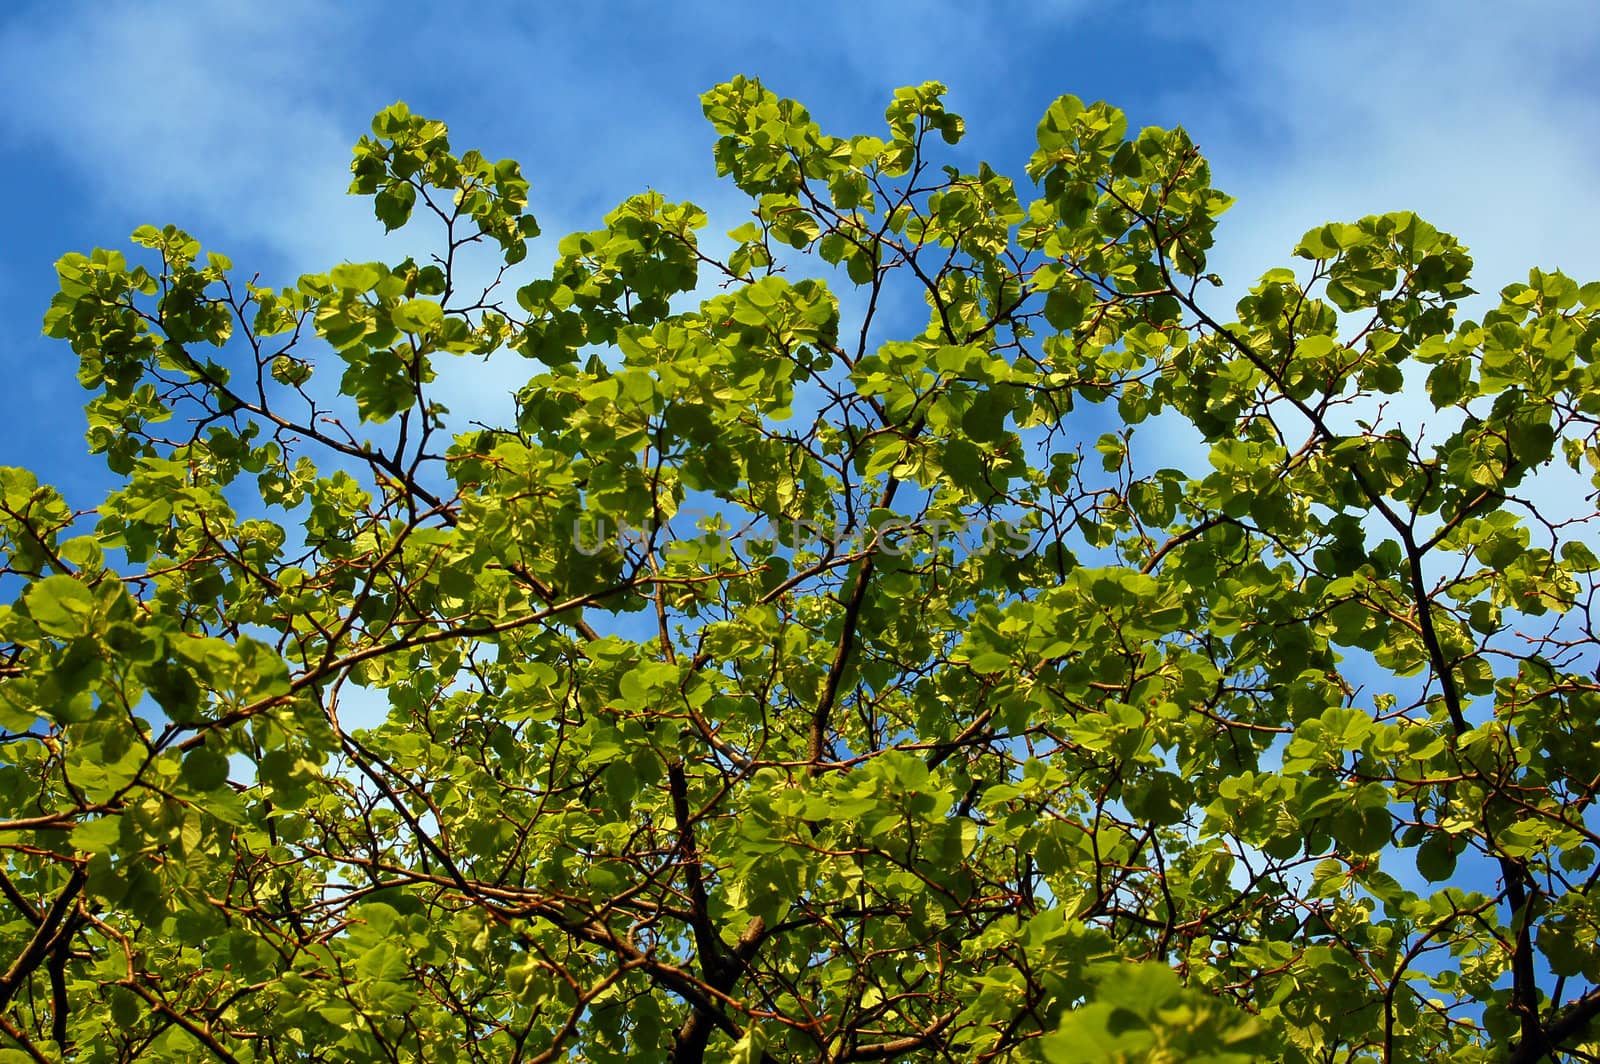 Green leaves in blue sky with clouds background